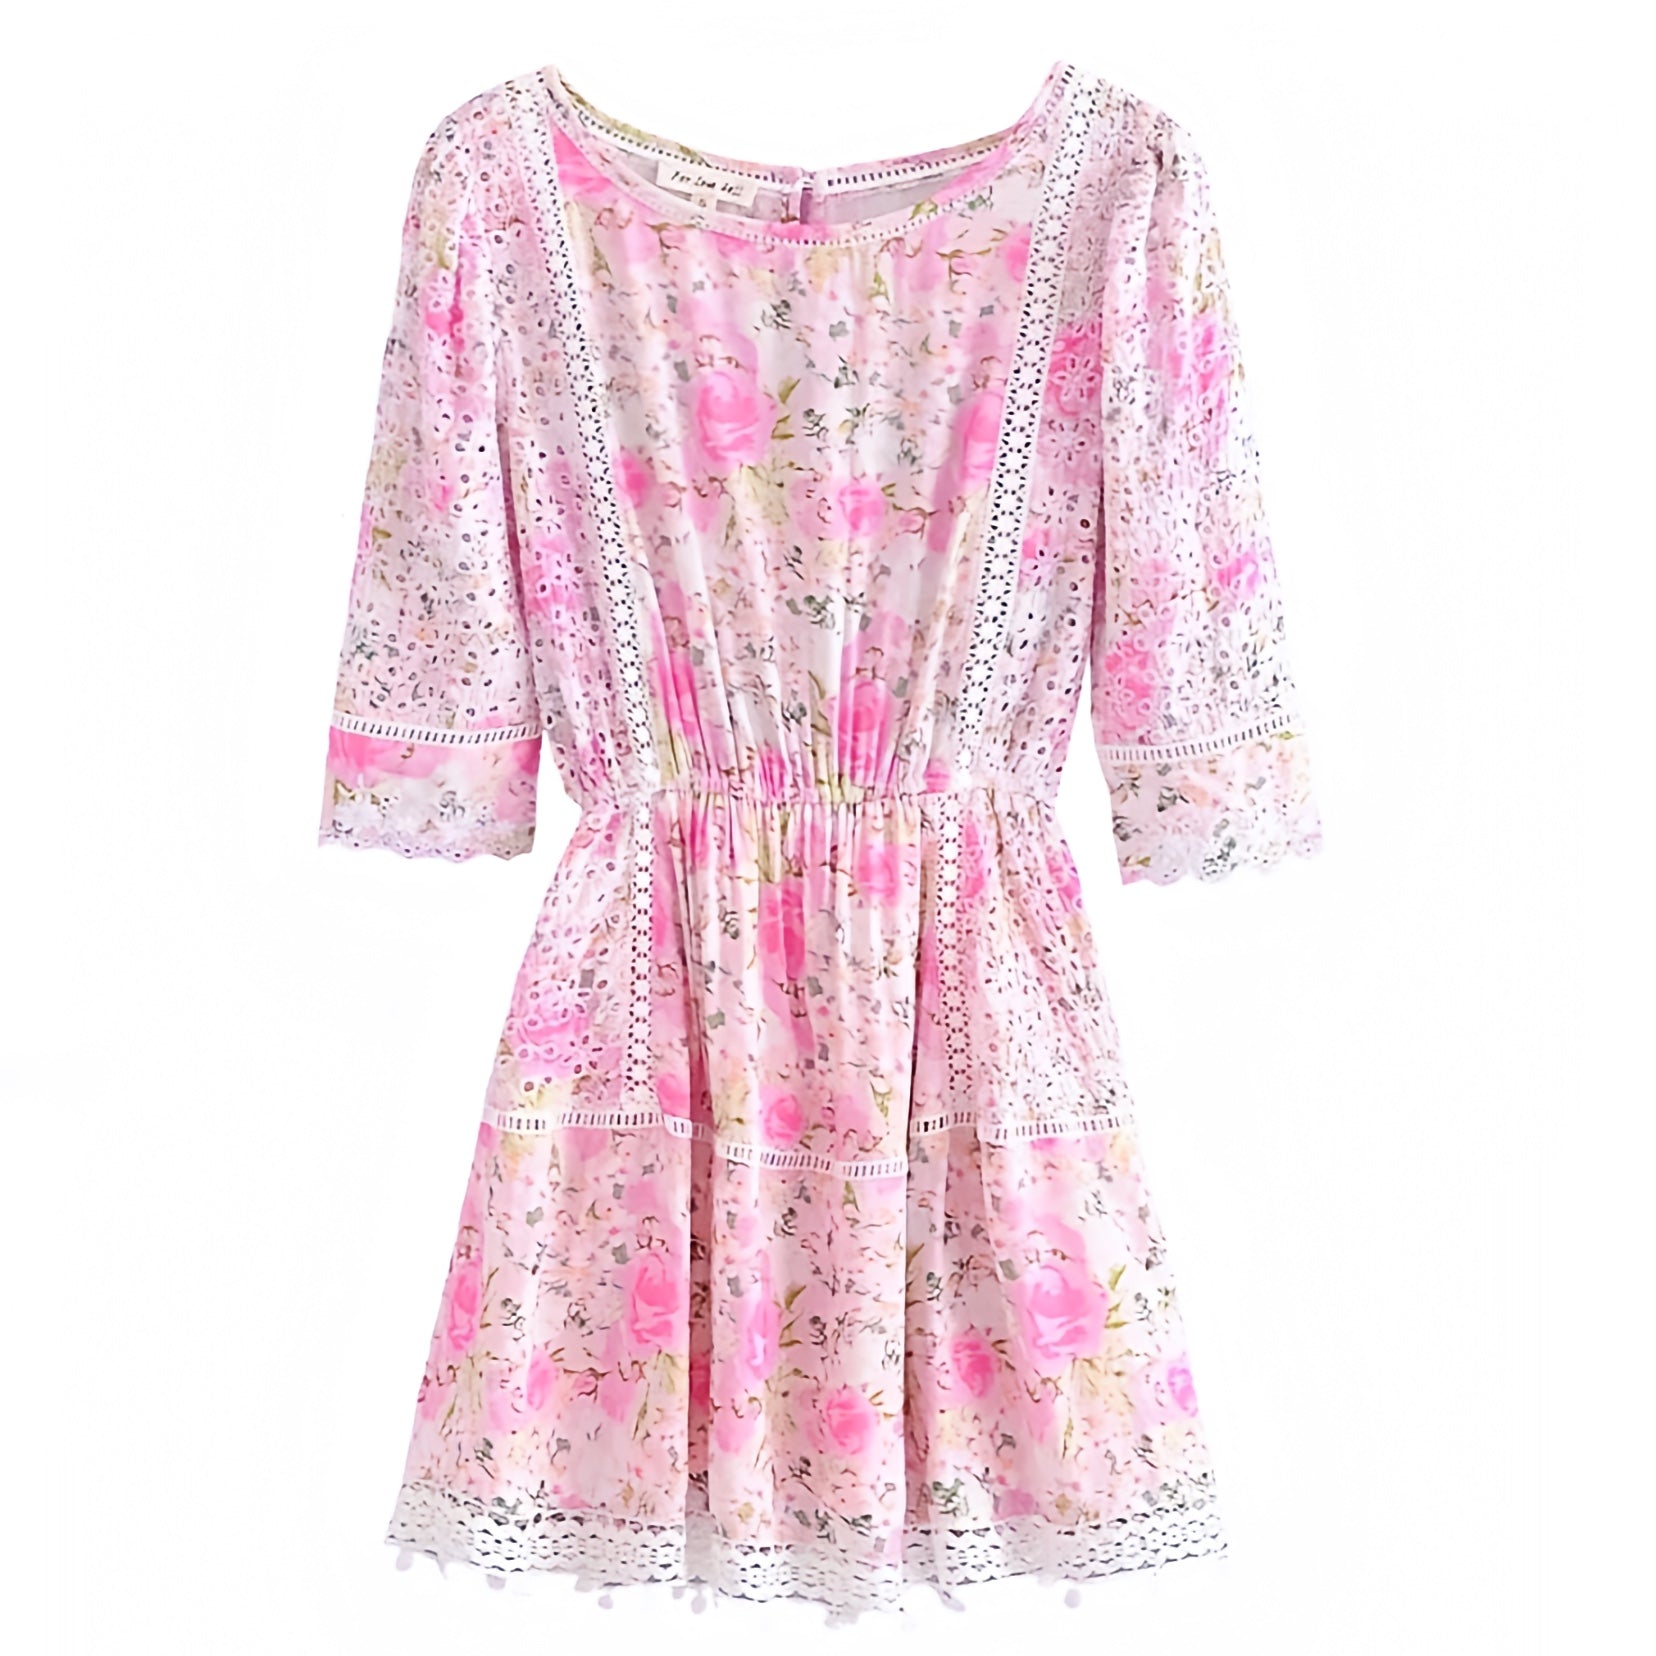 floral-print-pink-white-multi-color-flower-patterned-lace-trim-eyelet-embroidered-slim-fit-drop-waist-fitted-bodice-ruffled-scoop-neckline-short-sleeve-tiered-boho-flowy-mini-dress-women-ladies-chic-trendy-spring-2024-summer-elgant-semi-formal-casual-feminine-classy-prom-party-debutante-wedding-guest-homecoming-dance-preppy-style-beach-wear-sundress-altard-state-revolve-loveshackfancy-dupe